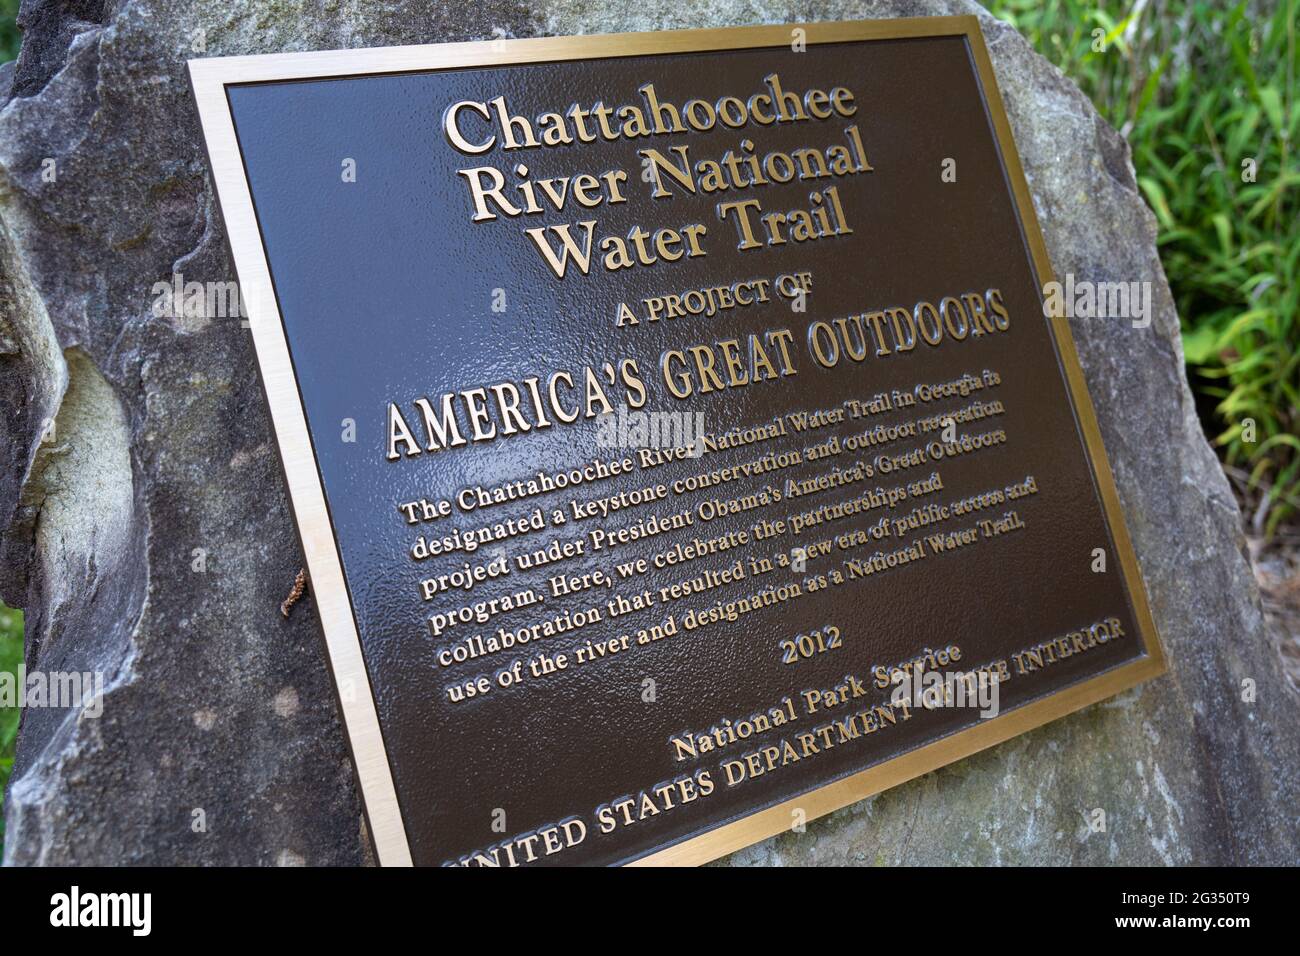 Chattahoochee River National Water Trail plaque at the Hewlett Lodge Island Ford Visitor Center in Sandy Springs, Georgia. (USA) Stock Photo